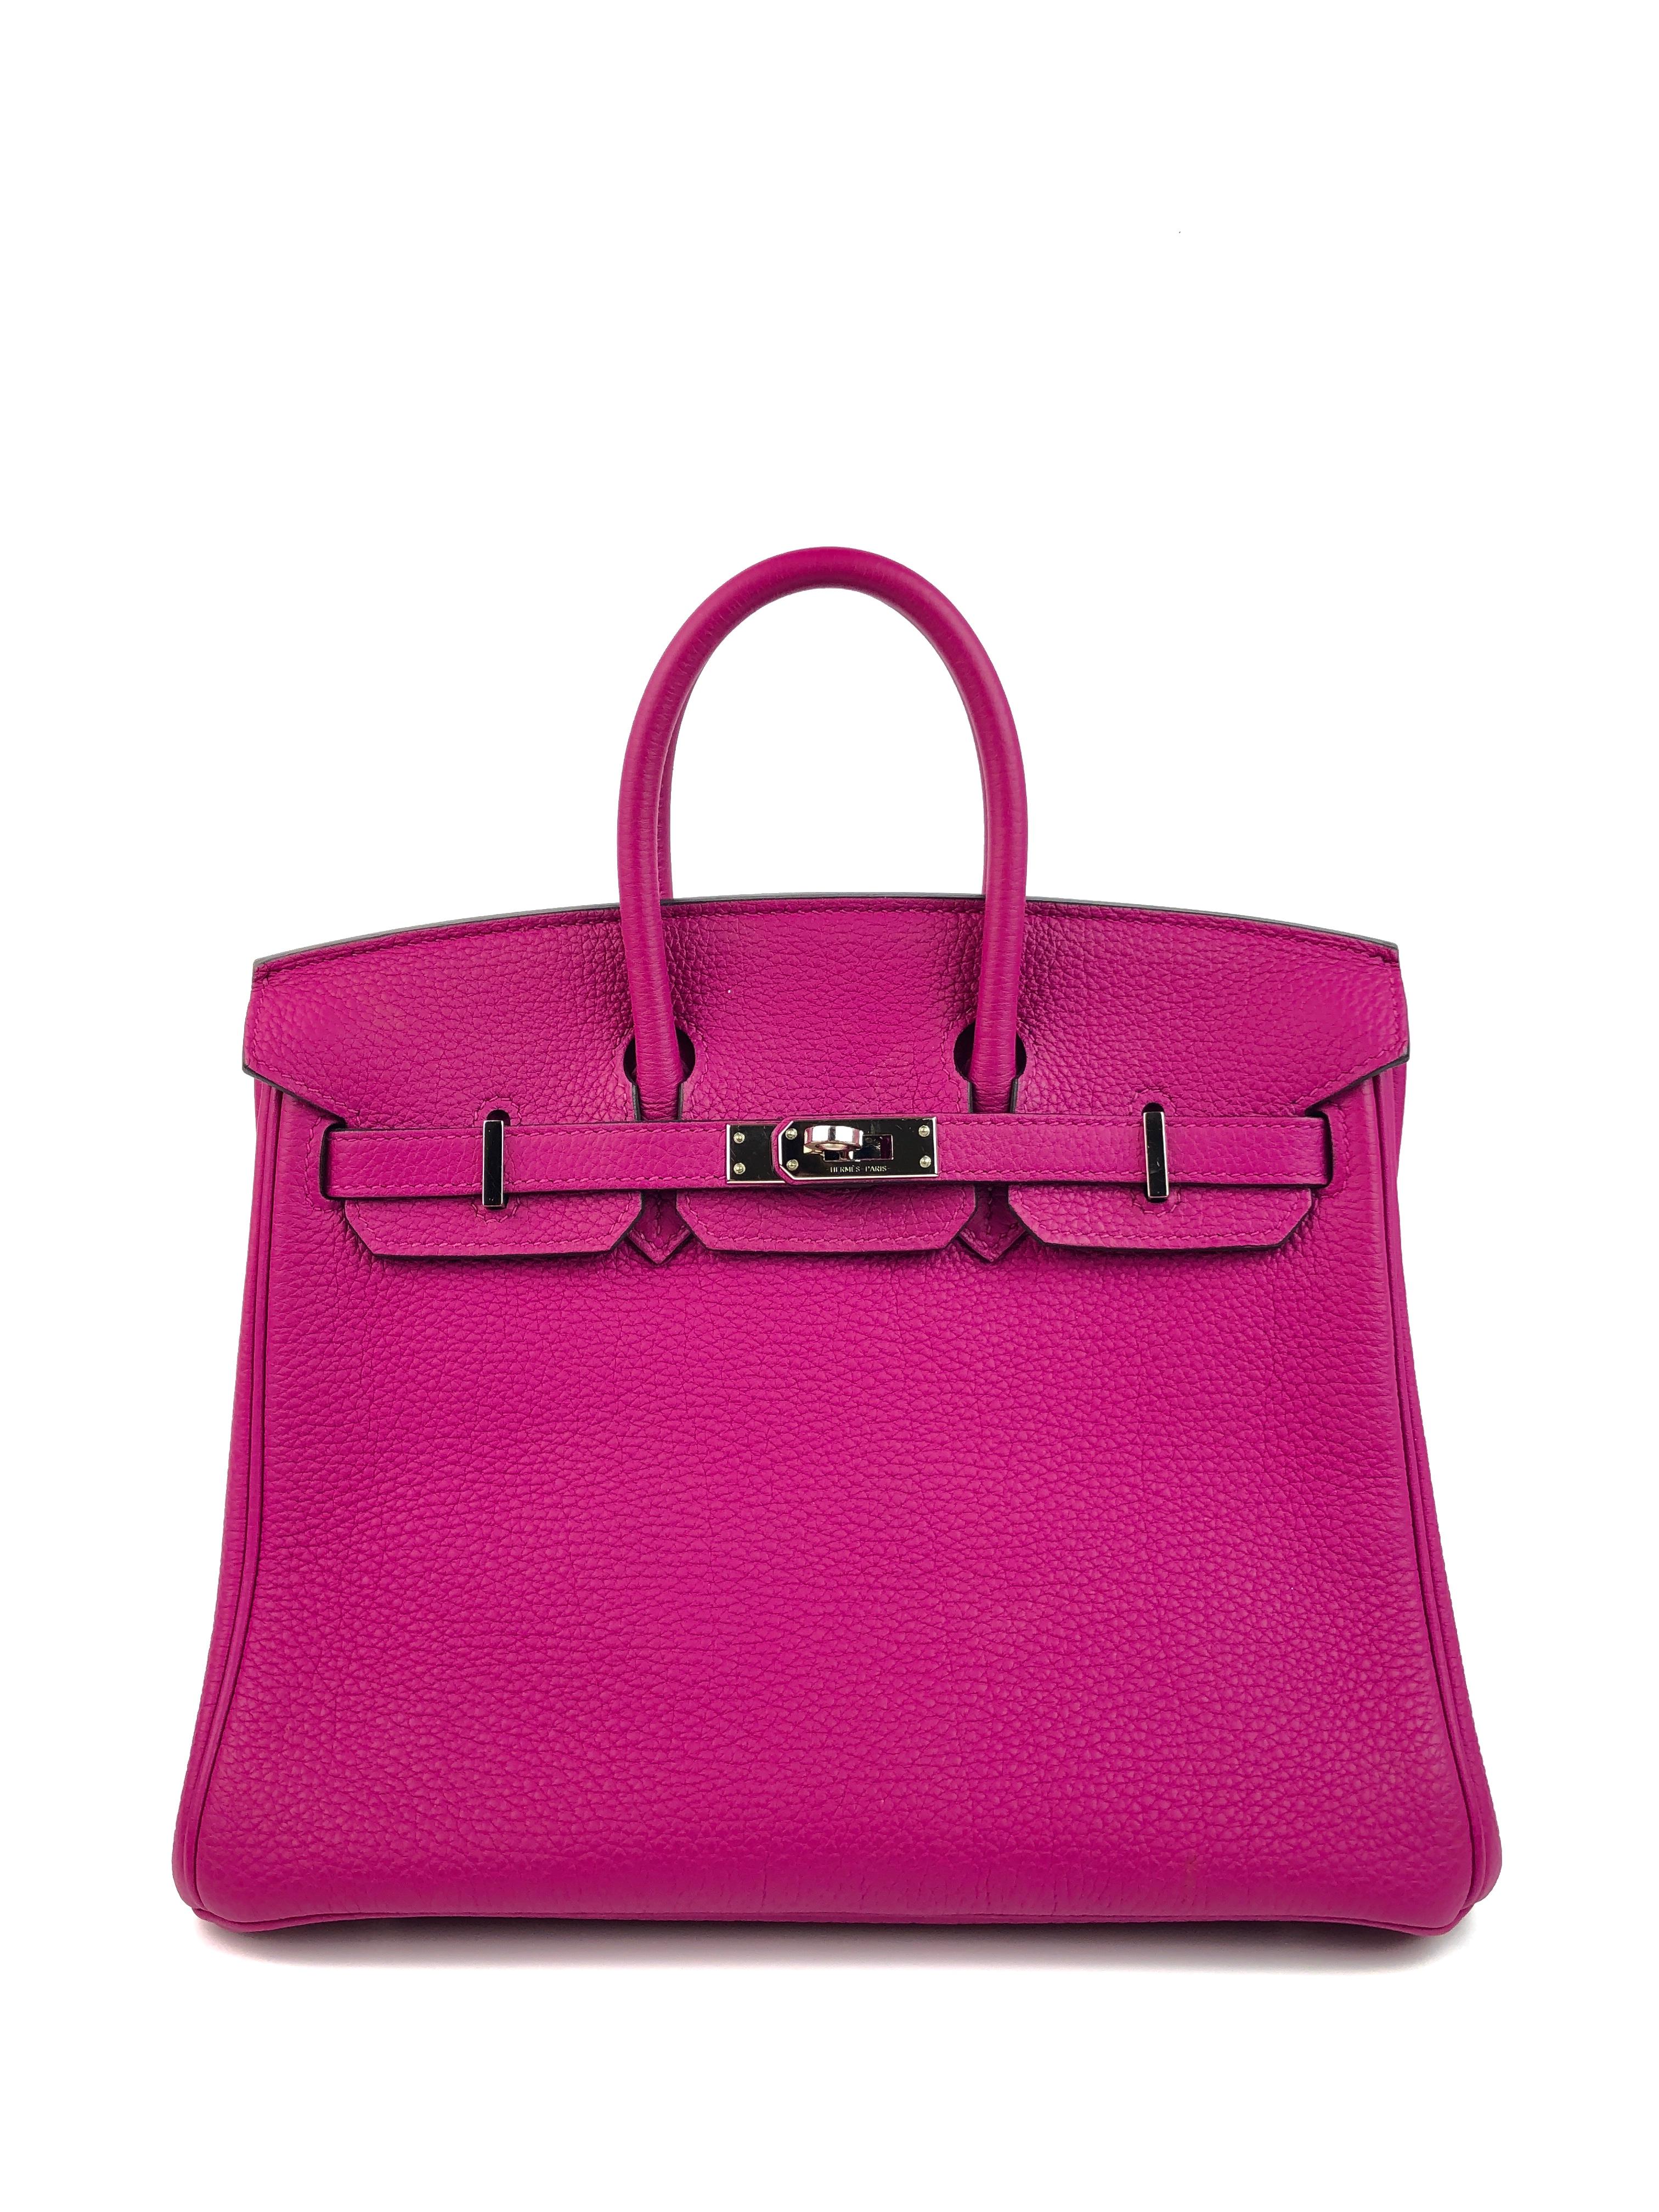 Hermes Birkin 25 Rose Pourpre Pink Palladium Hardware. A Stamp 2017, Excellent Condition Light Hairlines on Hardware. Perfect Structure and Corners. 

Shop with Confidence from Lux Addicts. Authenticity Guaranteed!